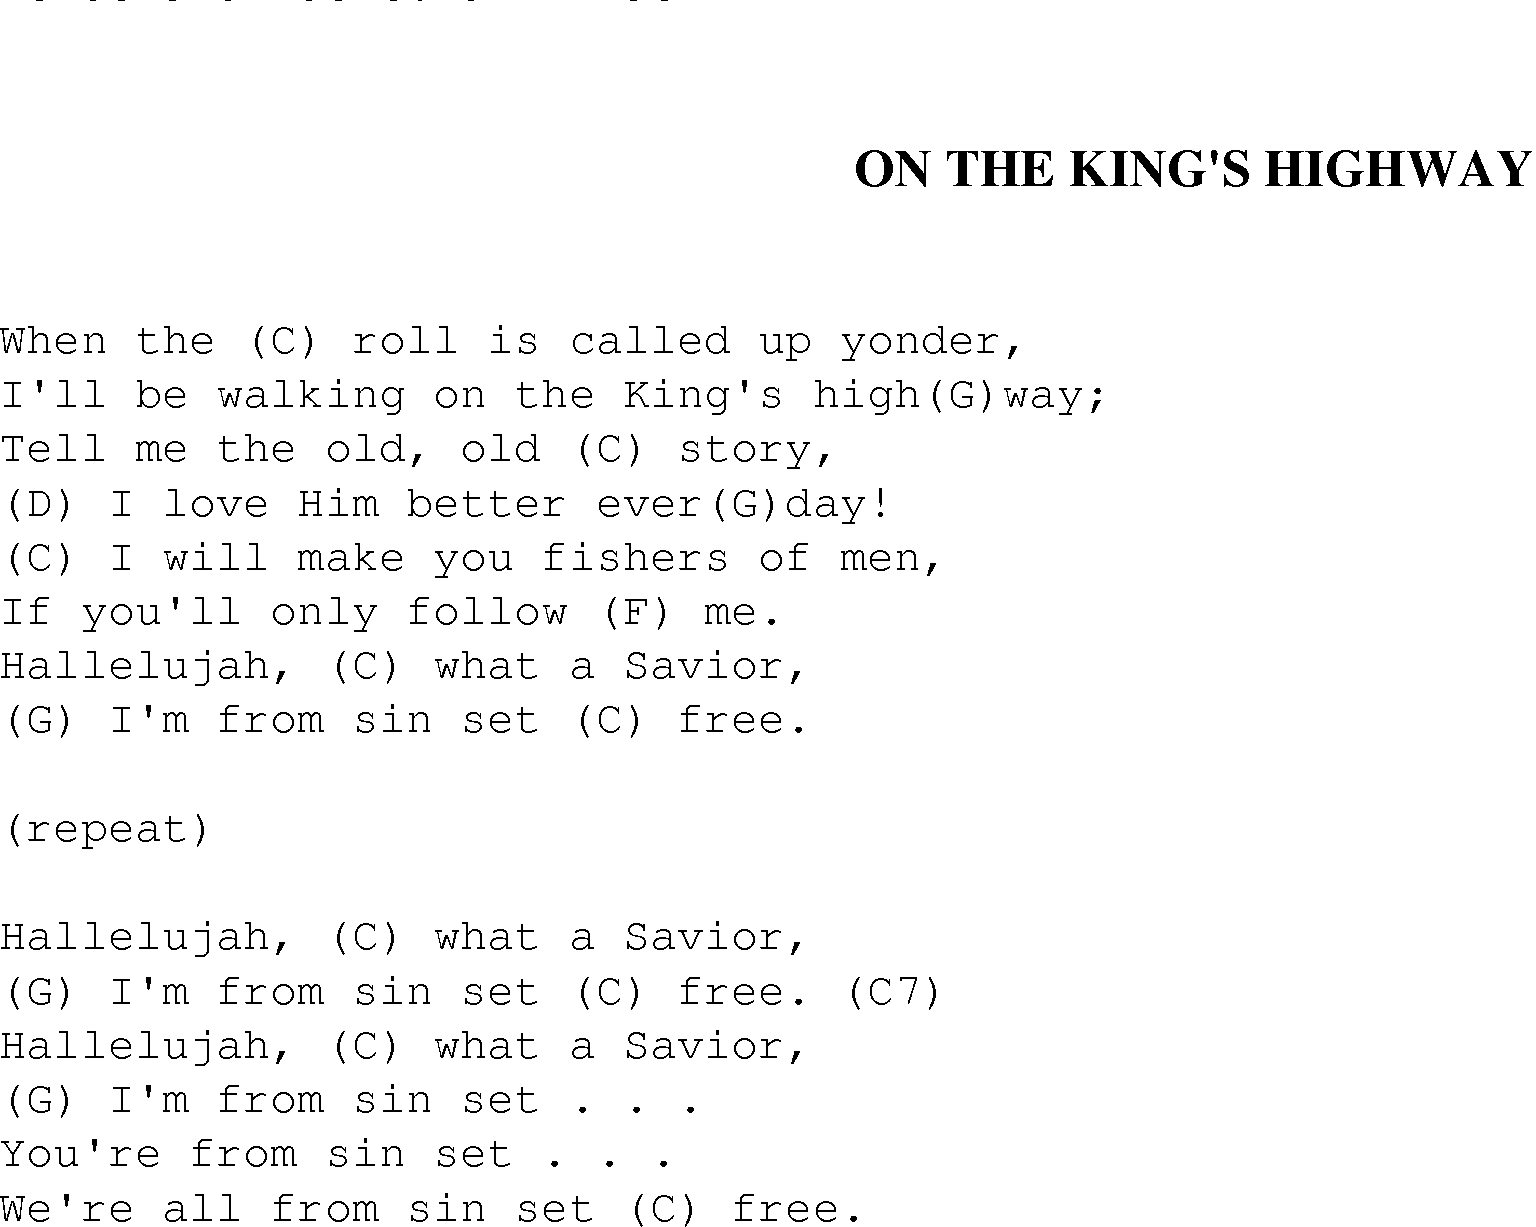 Gospel Song: on_the_kings_highway, lyrics and chords.